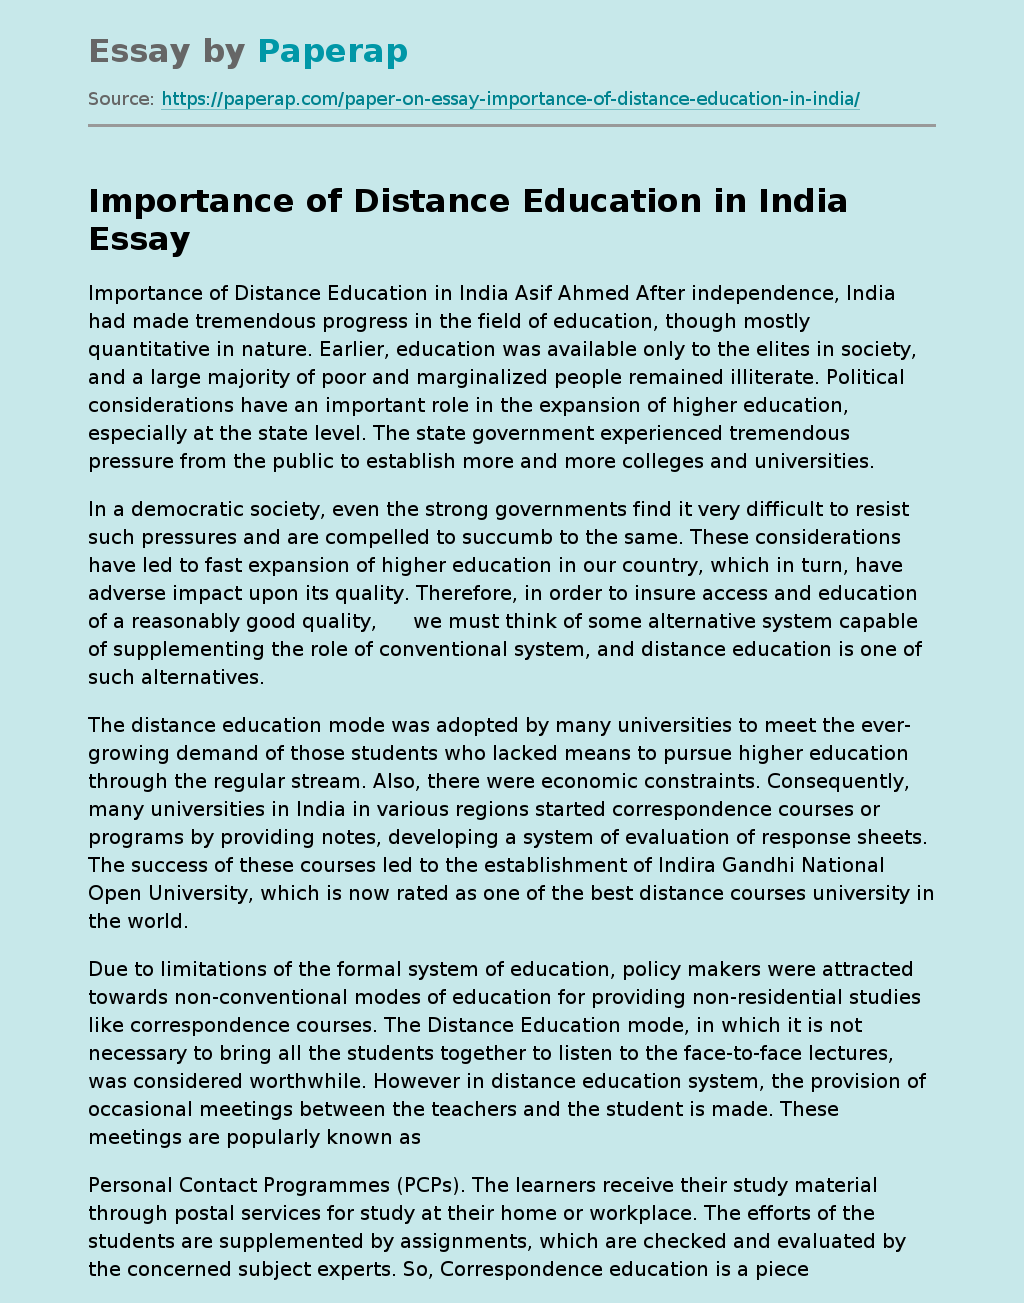 Importance of Distance Education in India